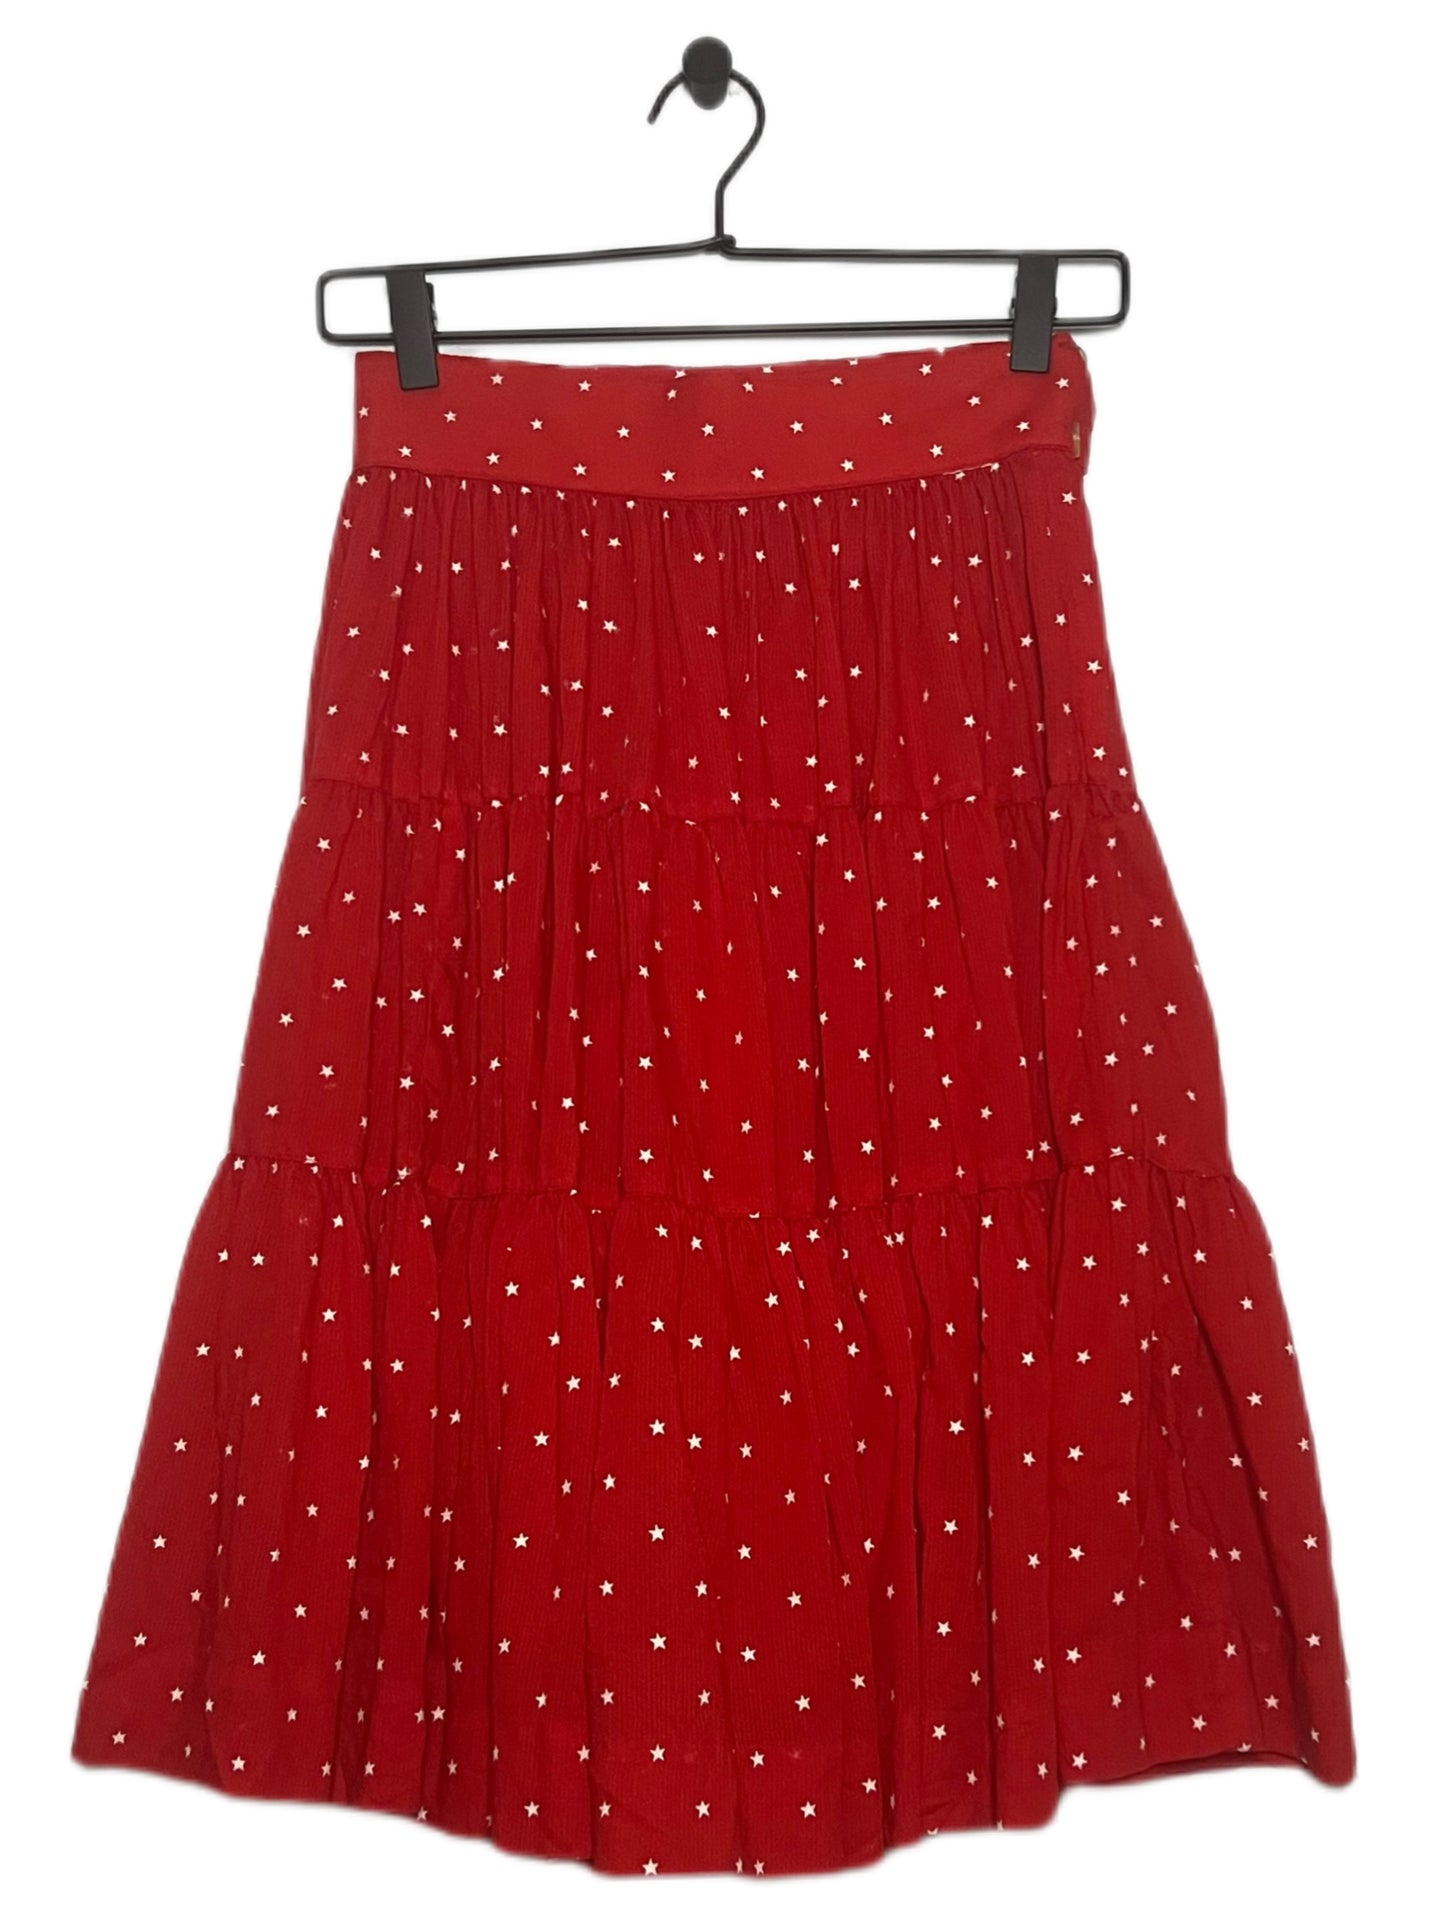 Red 1950s Skirt with White Stars